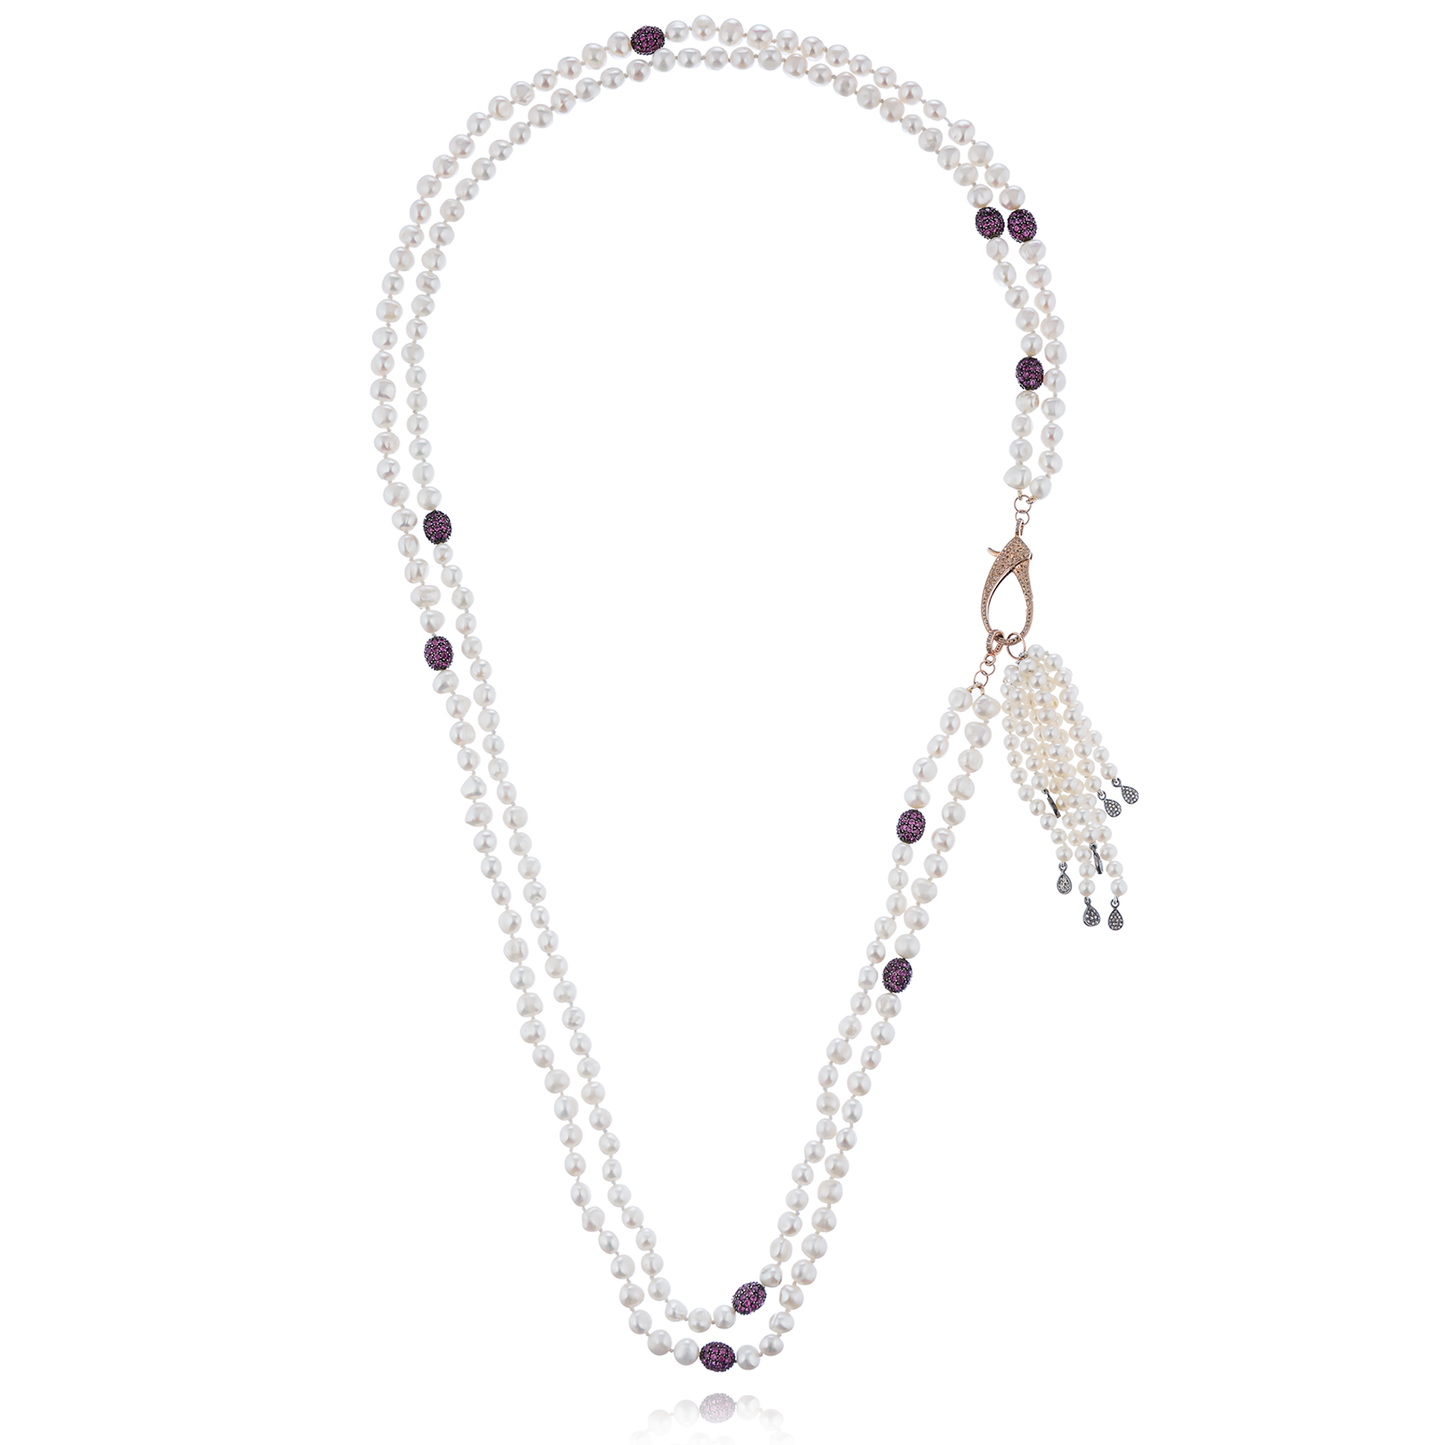 925 Silver Long Necklace with Freshwater Pearls & Garnet